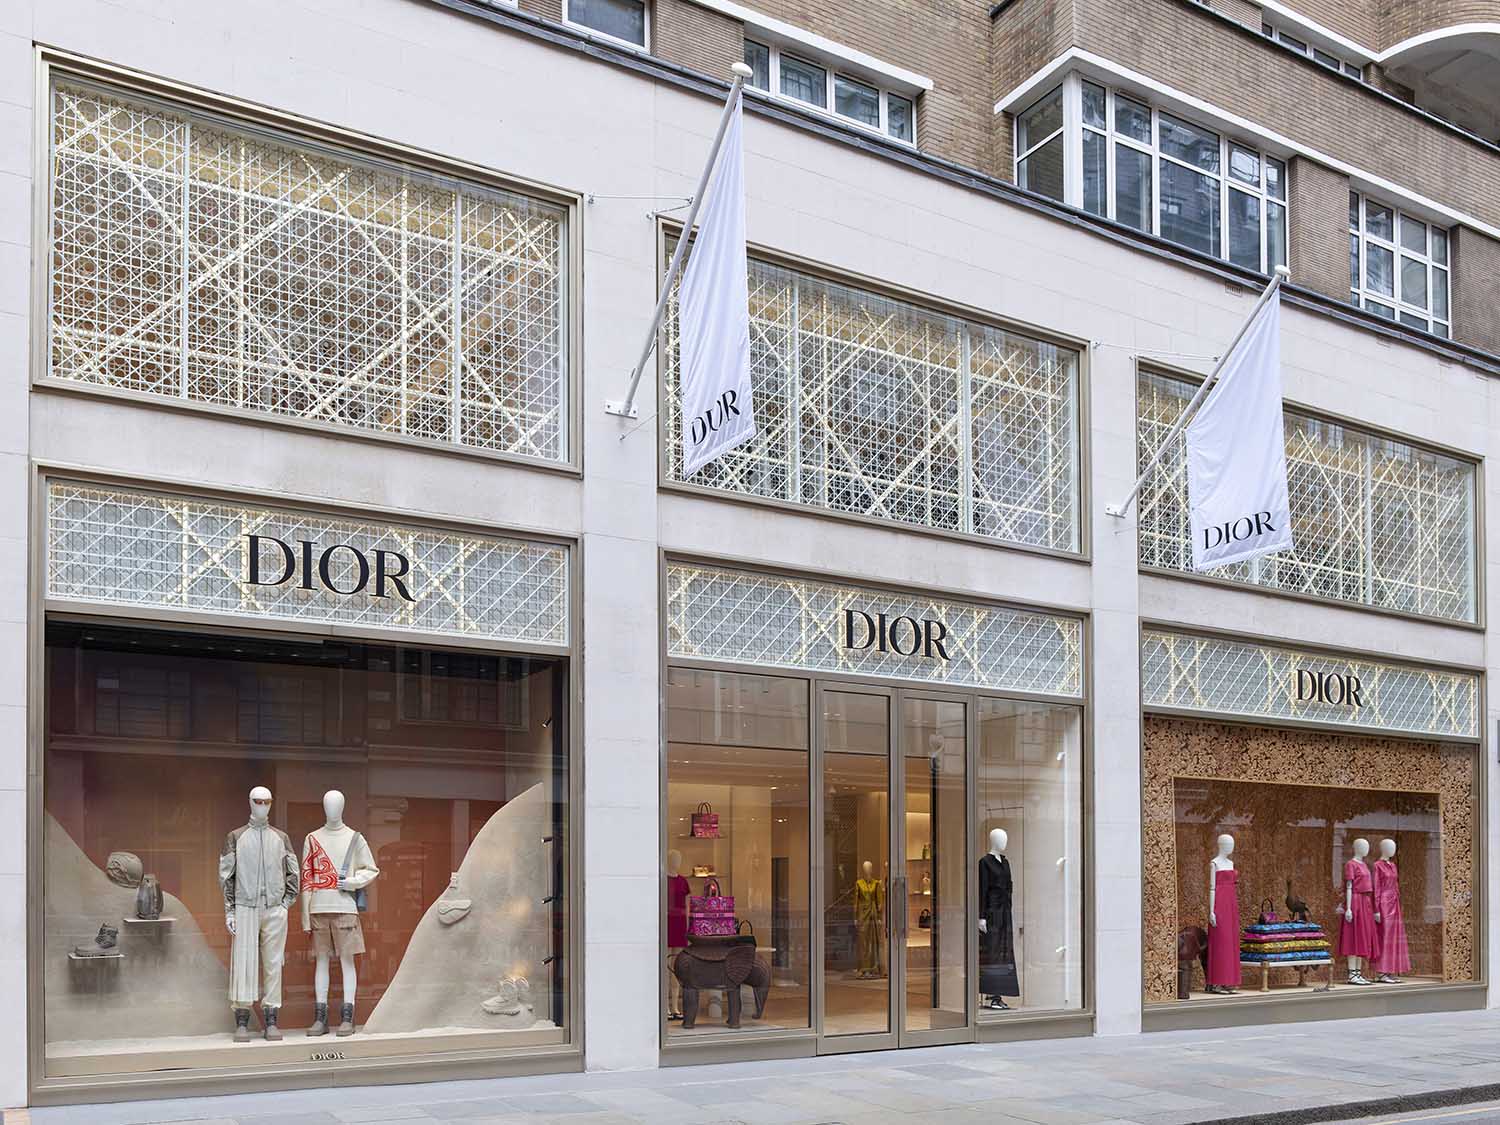 PARIS, FRANCE - JULY 22, 2017: Dior Fashion Luxury Store In Avenue